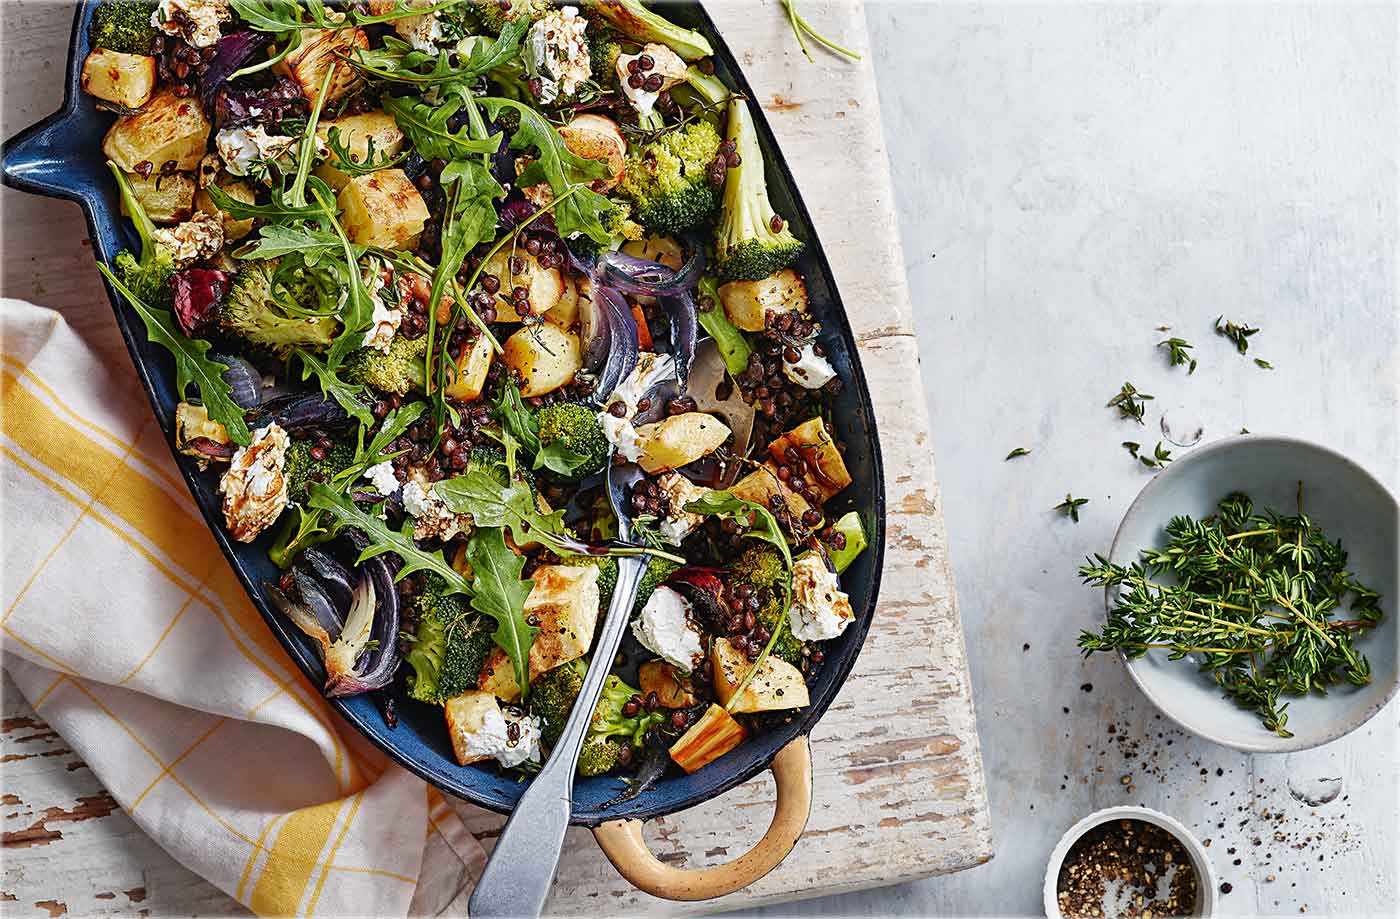 Parsnip, broccoli and goat's cheese bake recipe